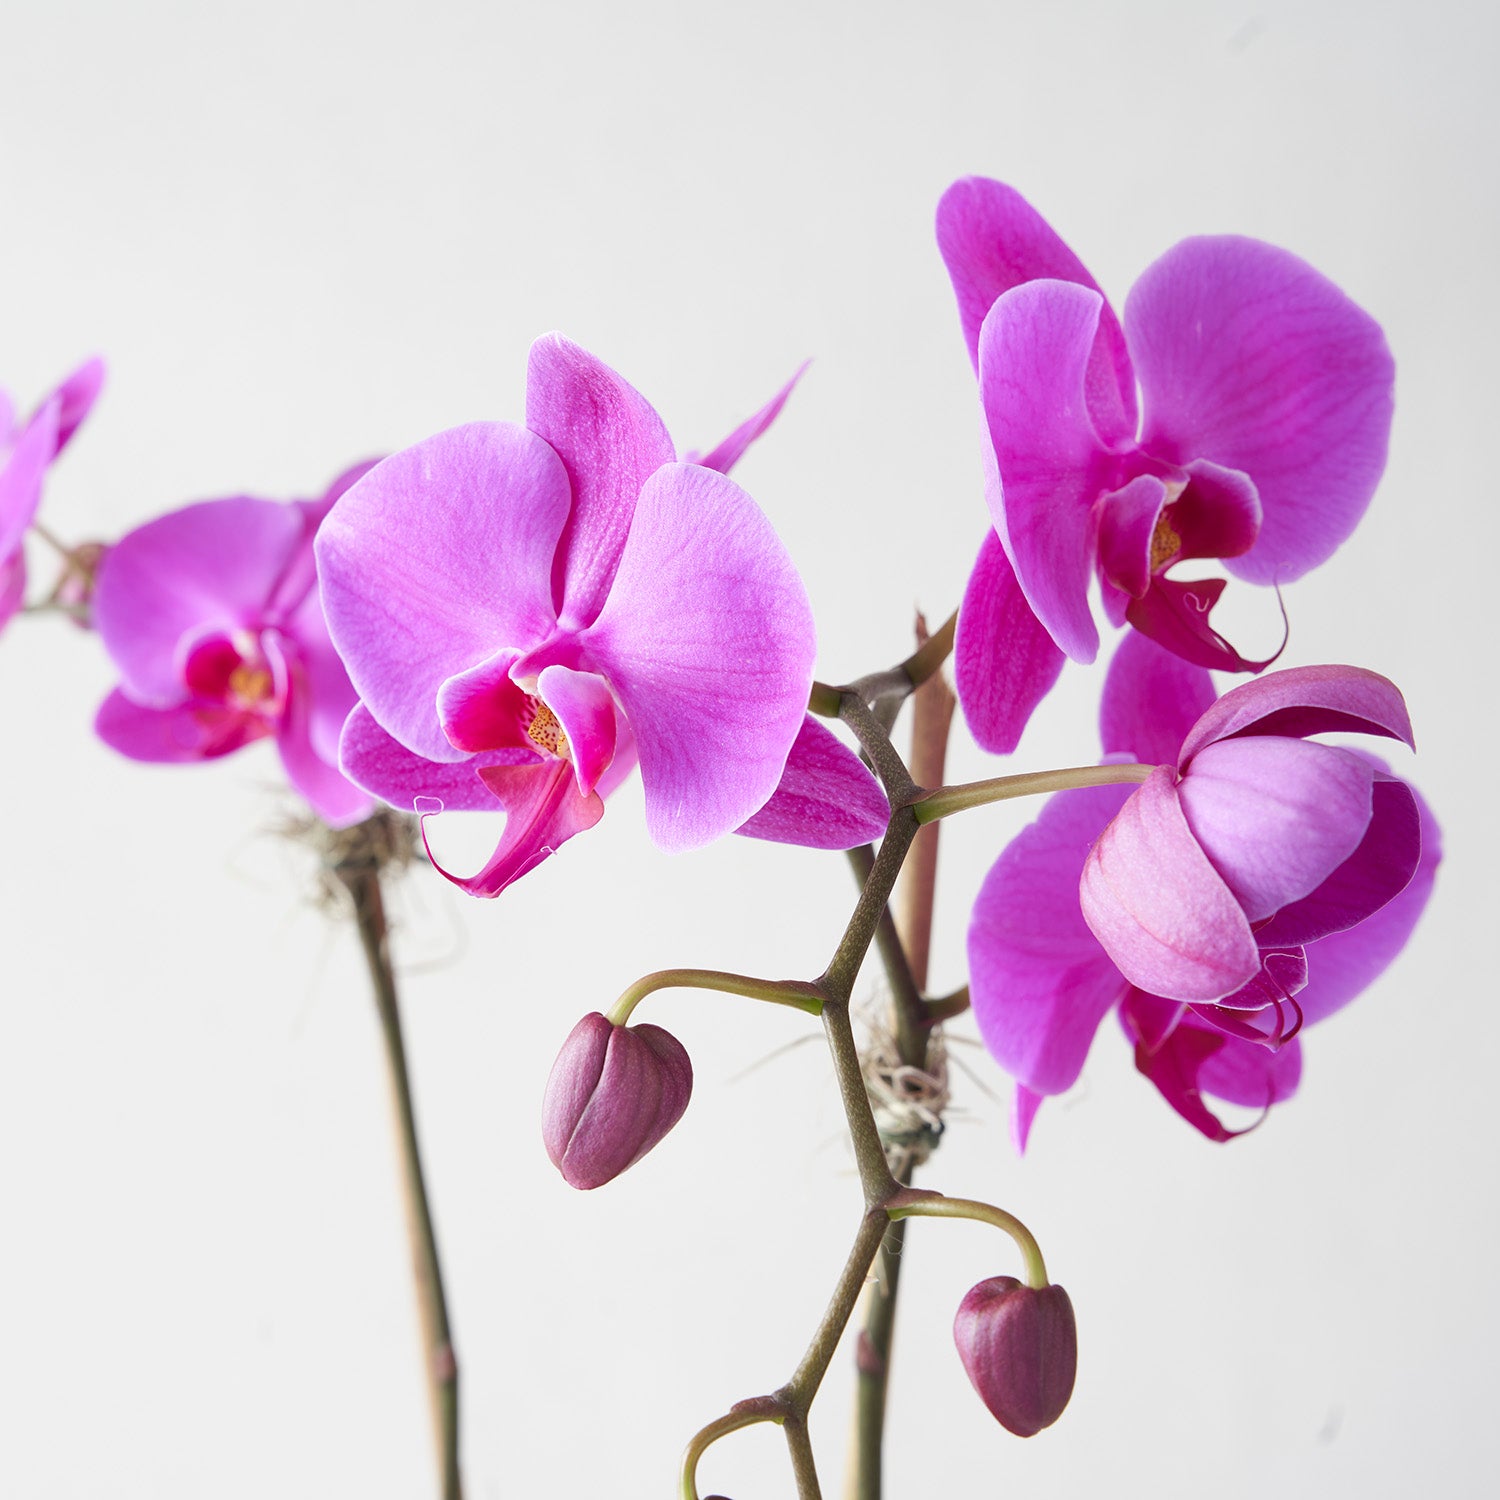 Closeup of two fuchsia Pink phalaenopsis orchid stems on white background.